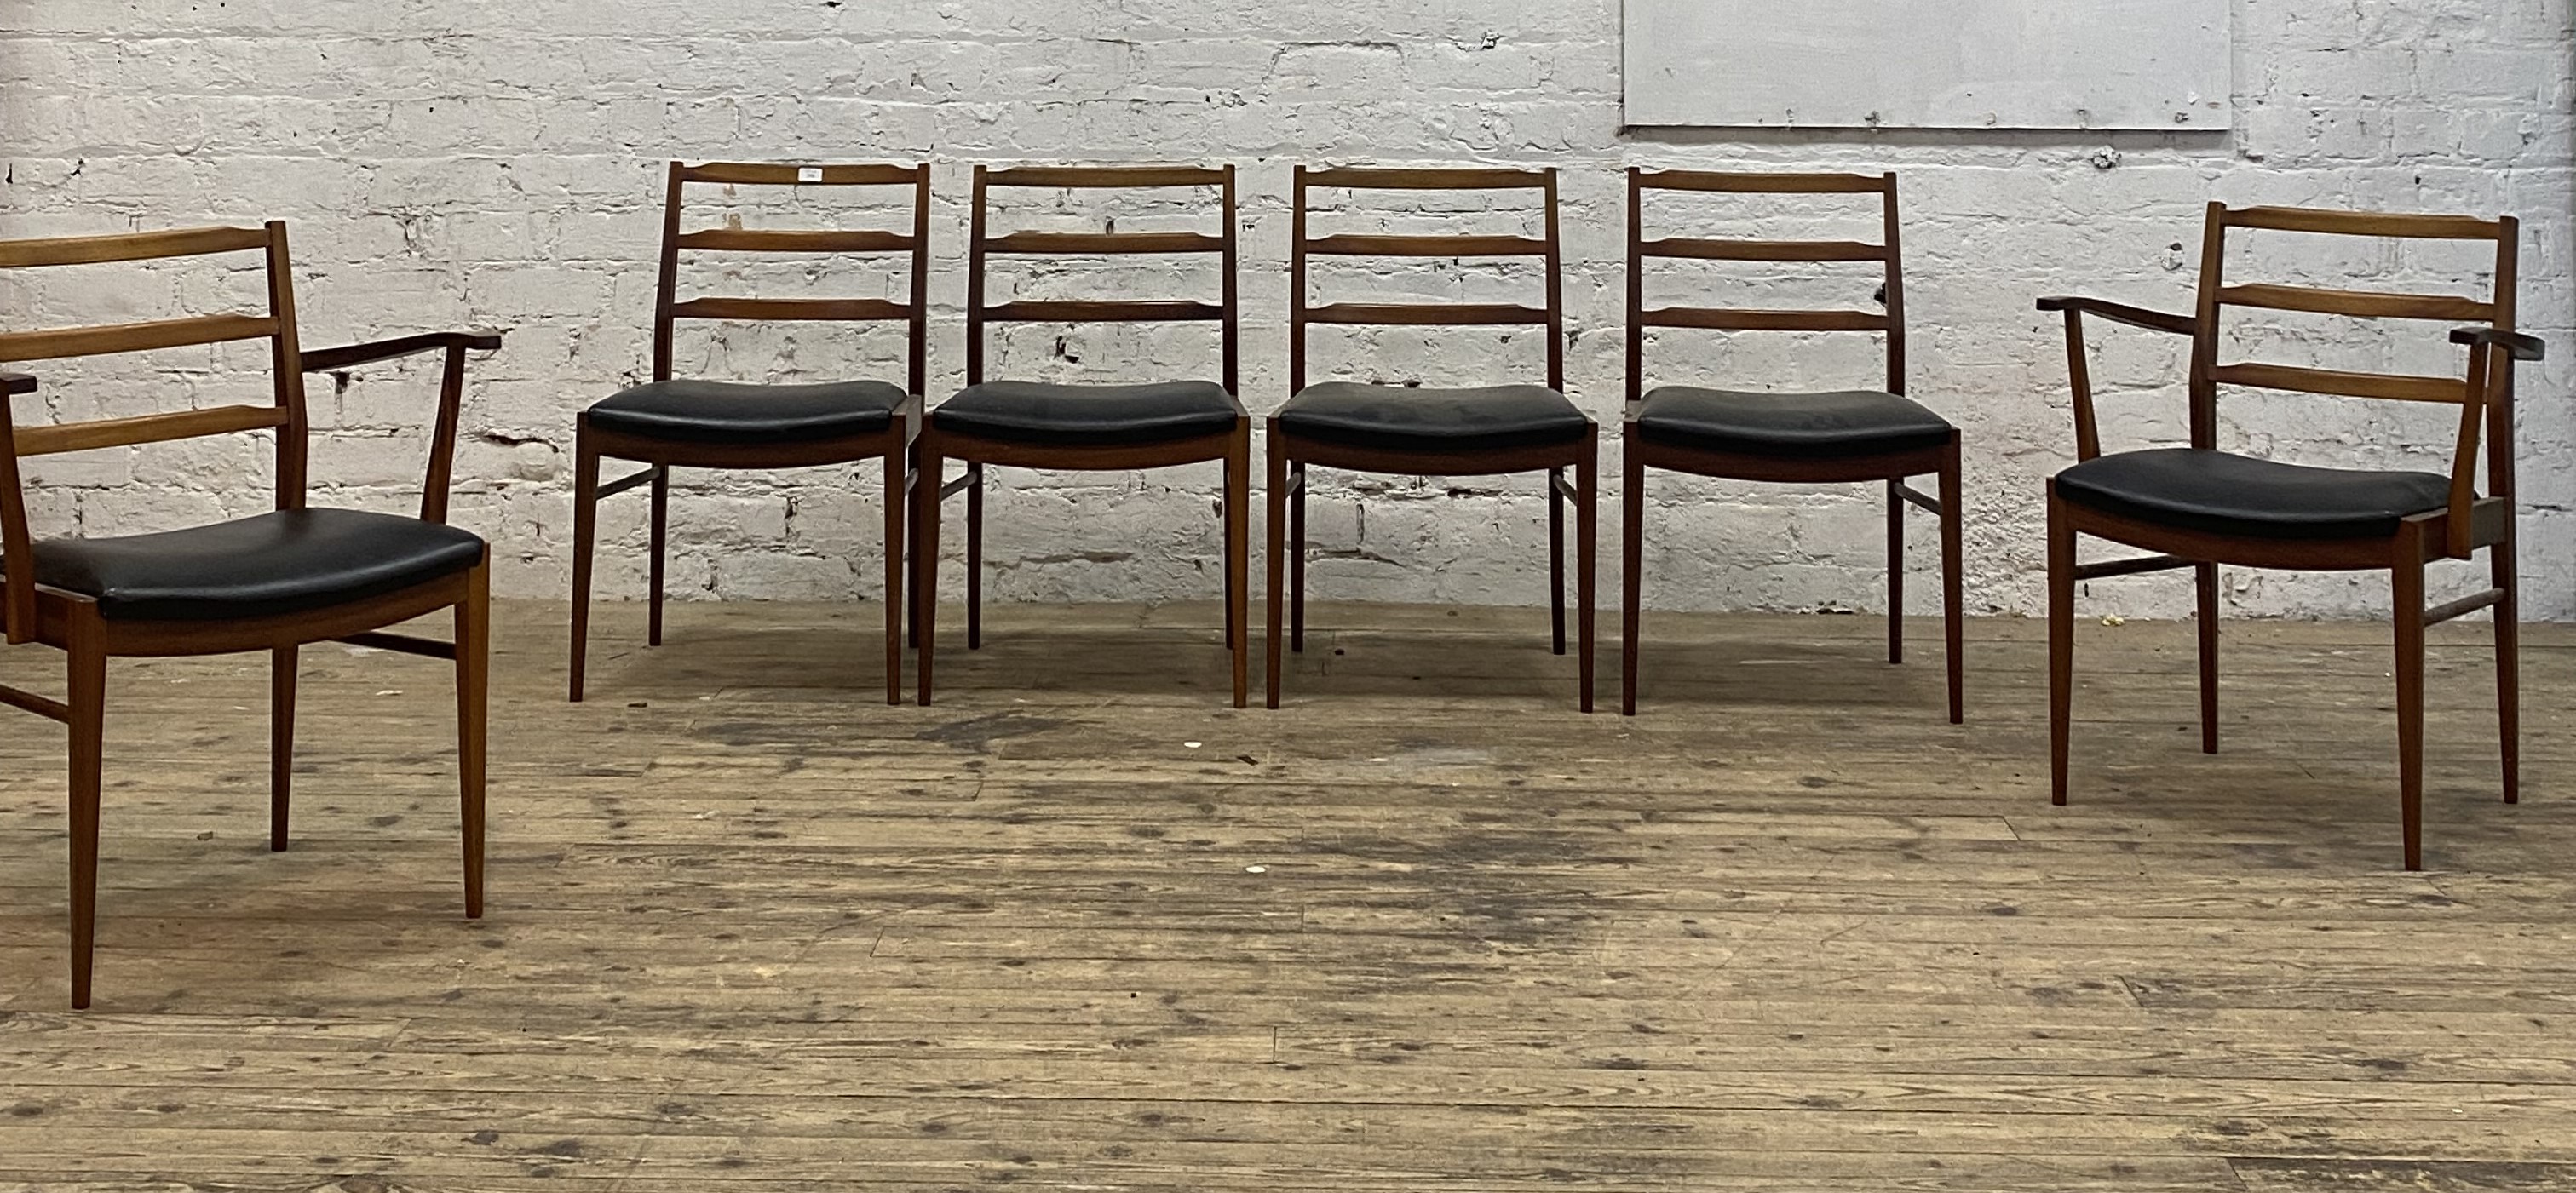 McIntosh of Kirkcaldy, A set of six (4+2) mid century teak dining chairs, circa 1960's, with